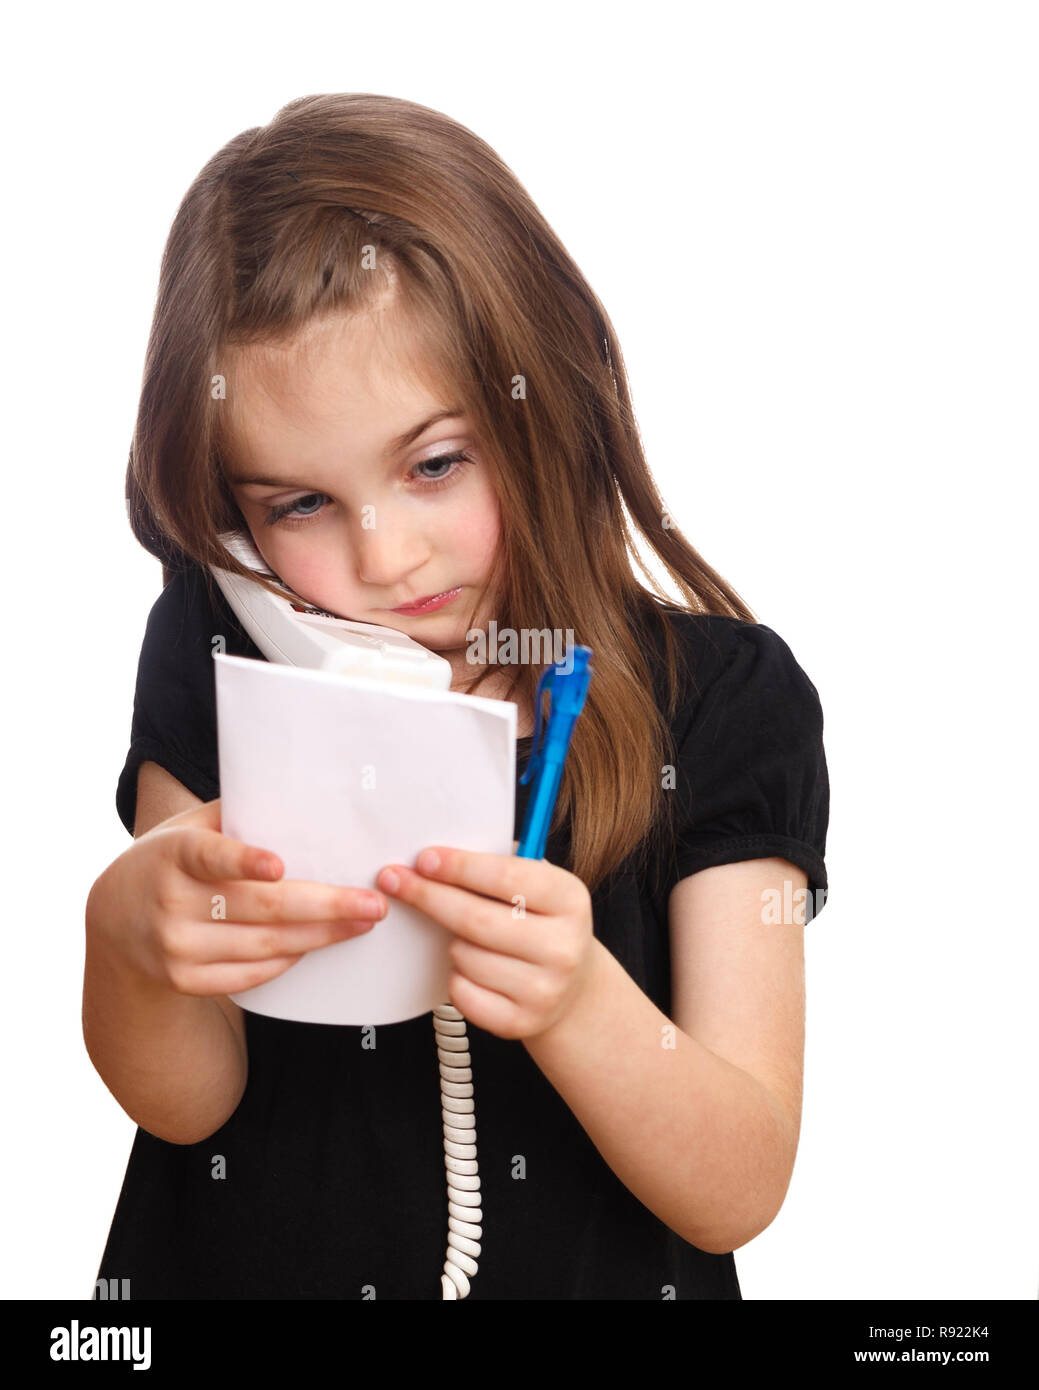 Cute young girl on the phone listening and taking notes on notepad Stock Photo